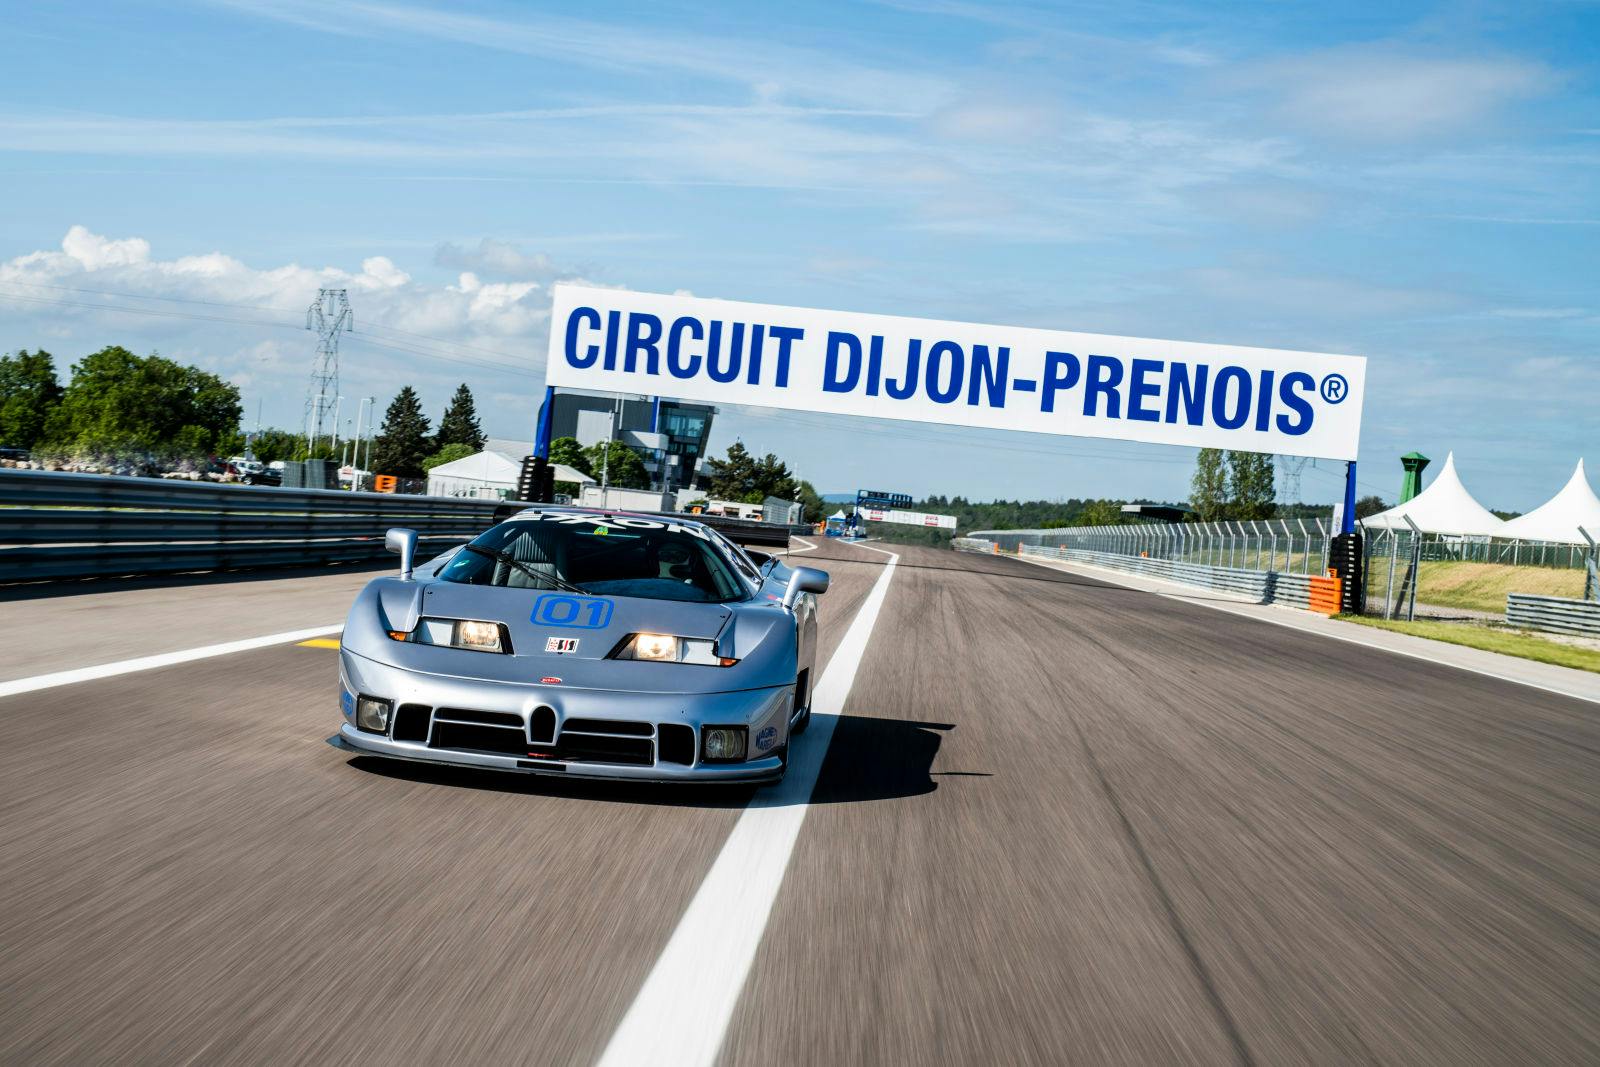 The Bugatti EB 110 Sport Competizione – Returning to the finishing line in Dijon after 25 years.